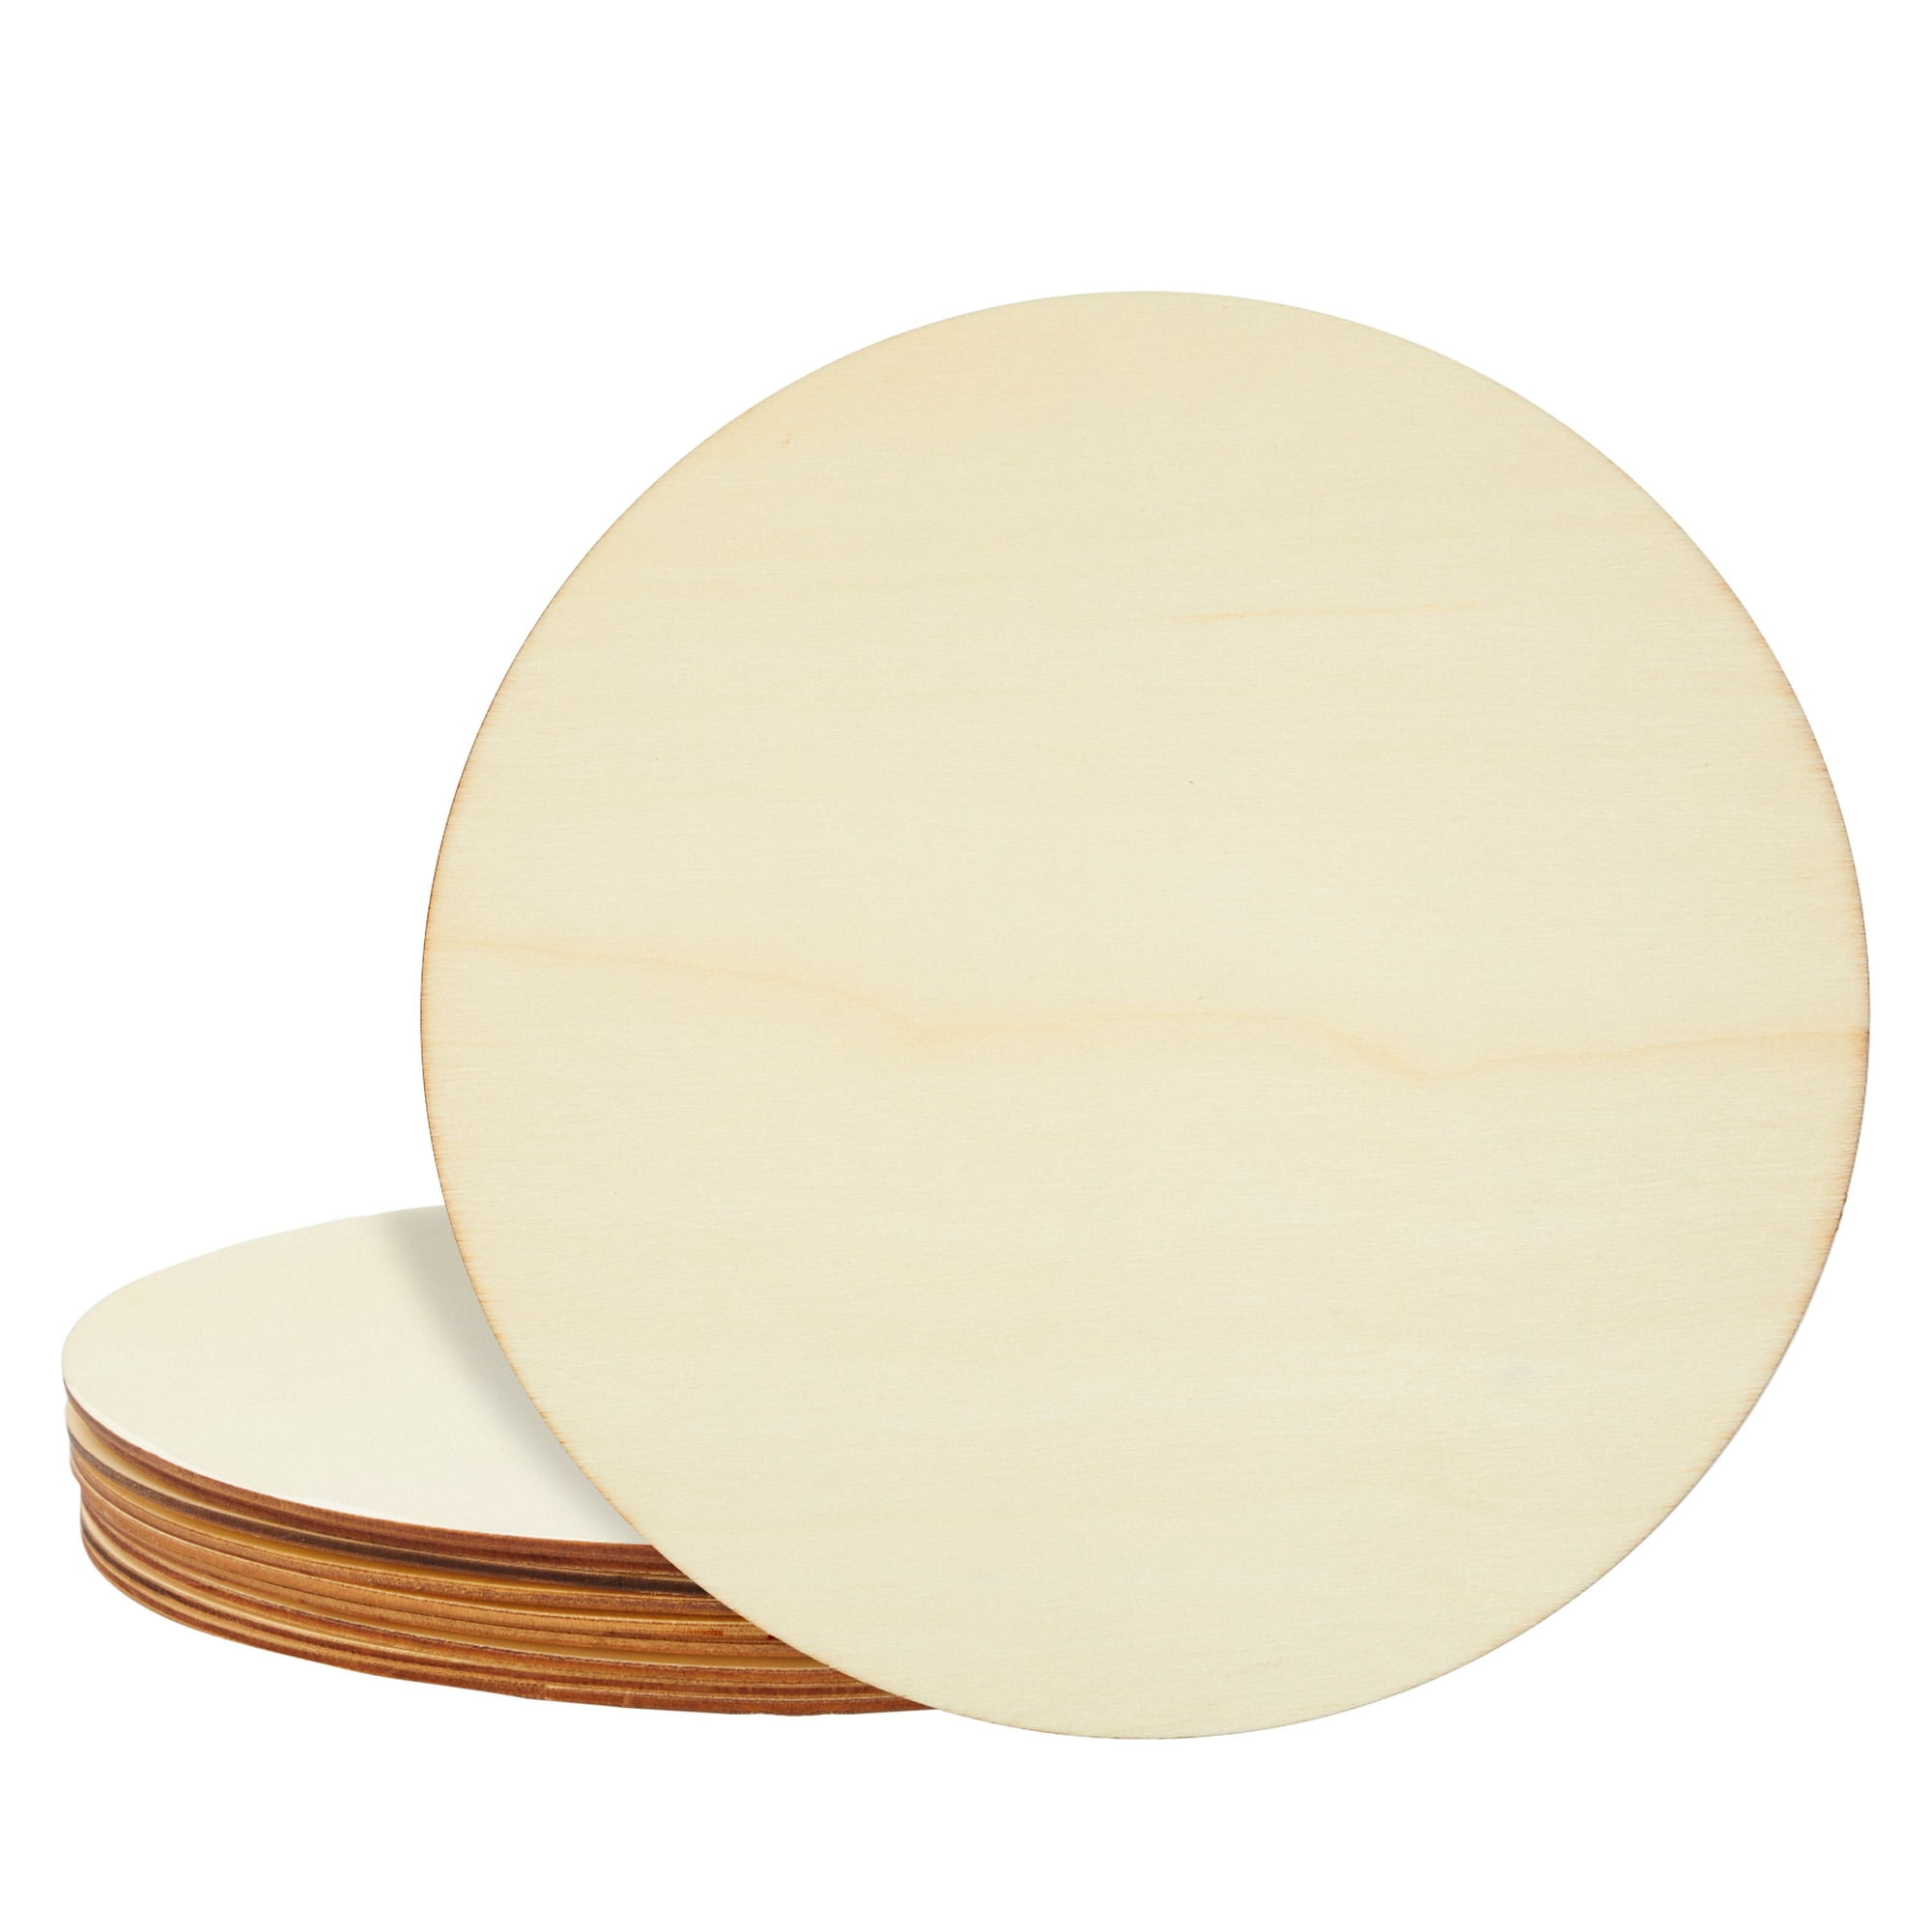 3 Pieces 12inch Wood Circles for Crafts, Unfinished Blank Wooden Round  Circle, Natural Wood Slices for DIY, Painting, Home, Party, Holiday Decor,  5ARTH 